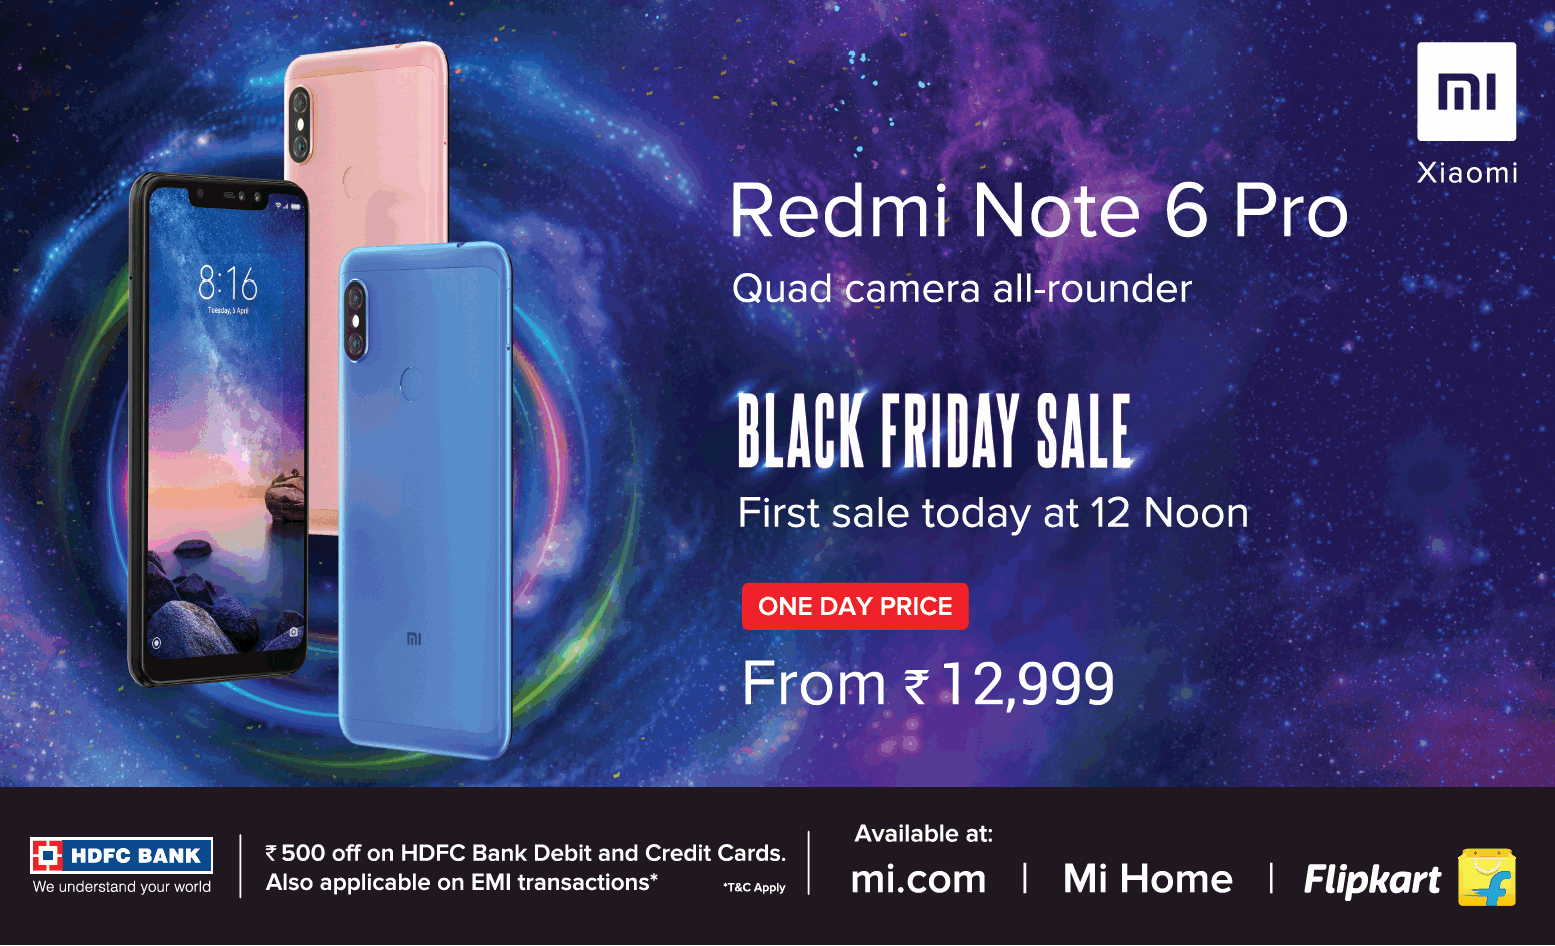 redmi-note-6-pro-black-friday-sale-ad-times-of-india-mumbai-23-11-2018.png